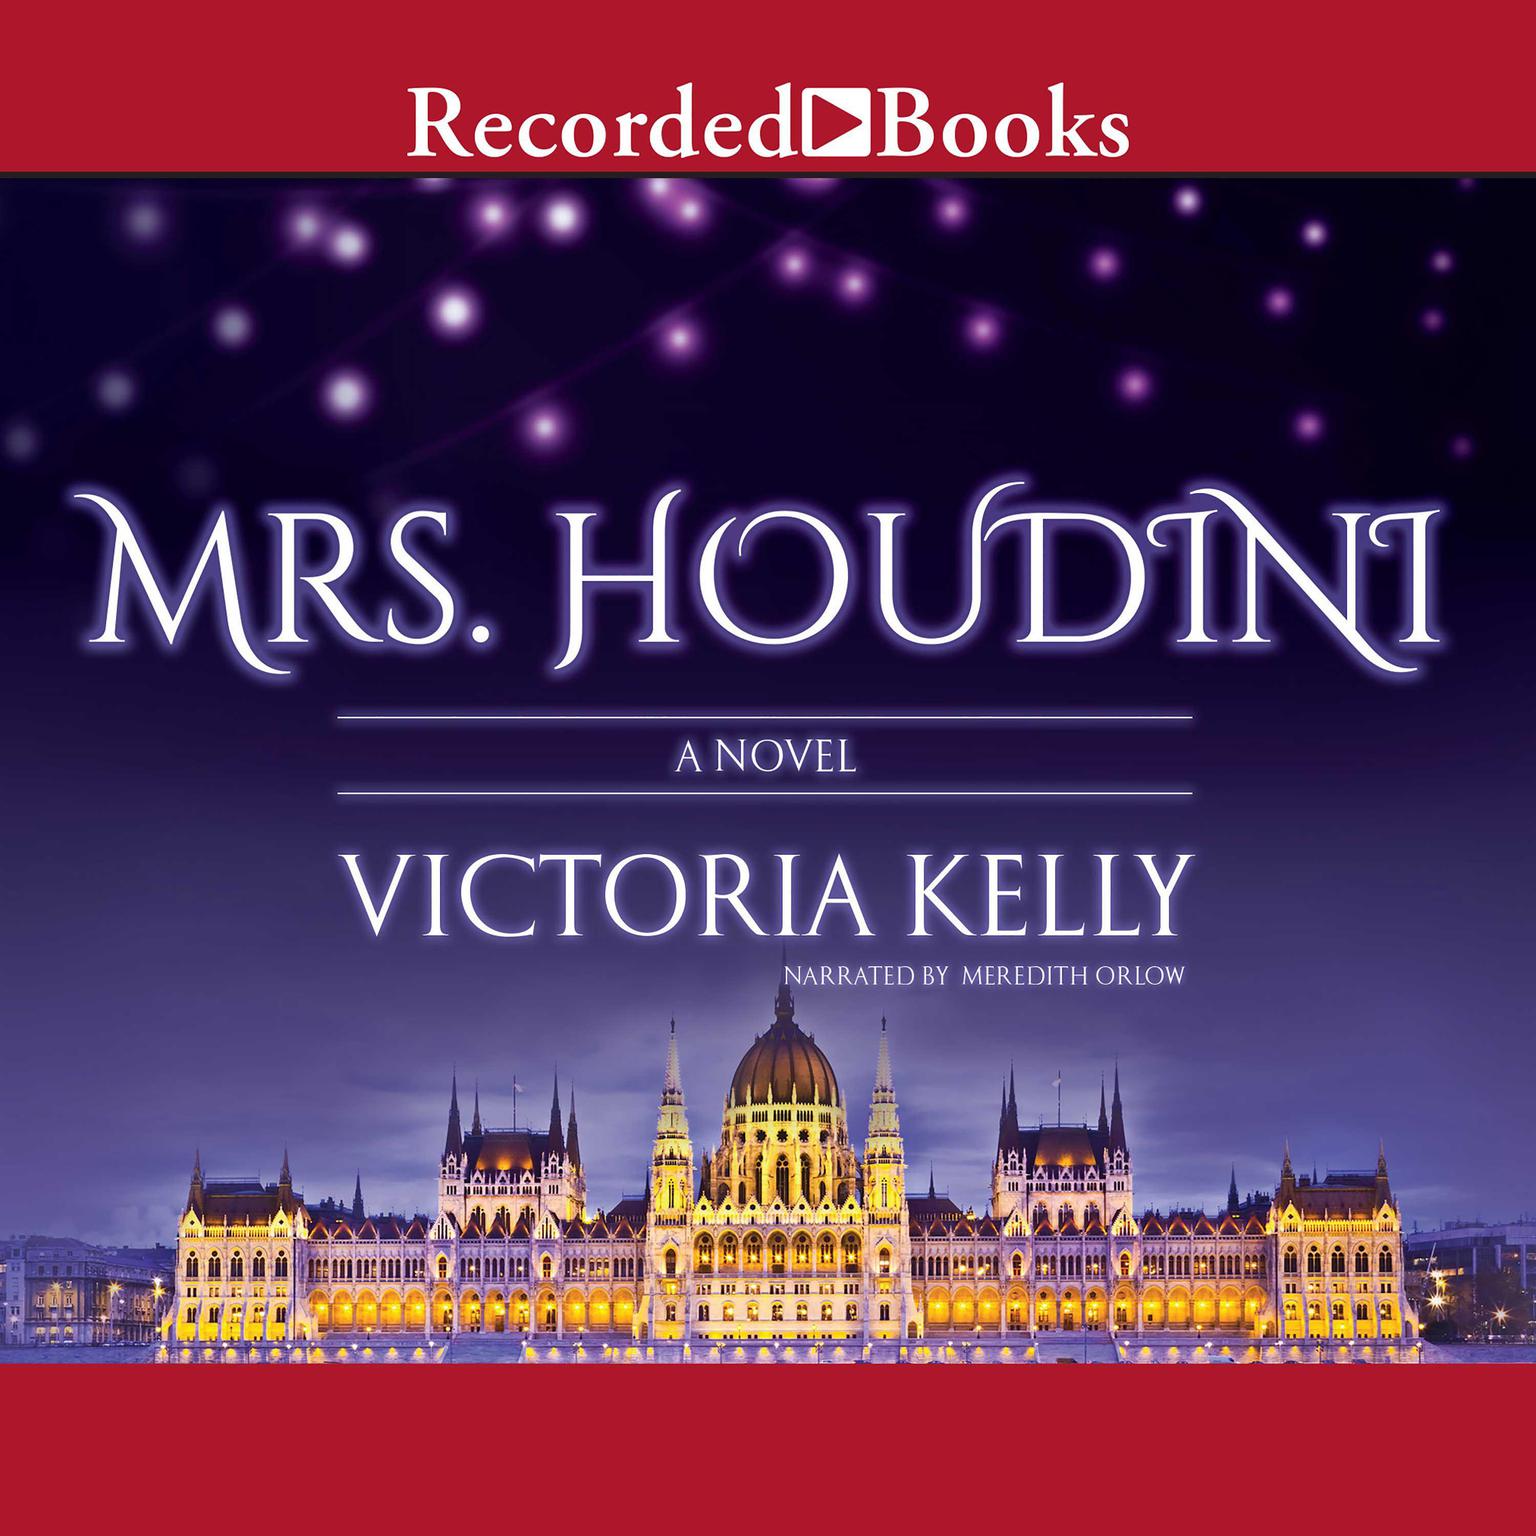 Mrs. Houdini Audiobook, by Victoria Kelly